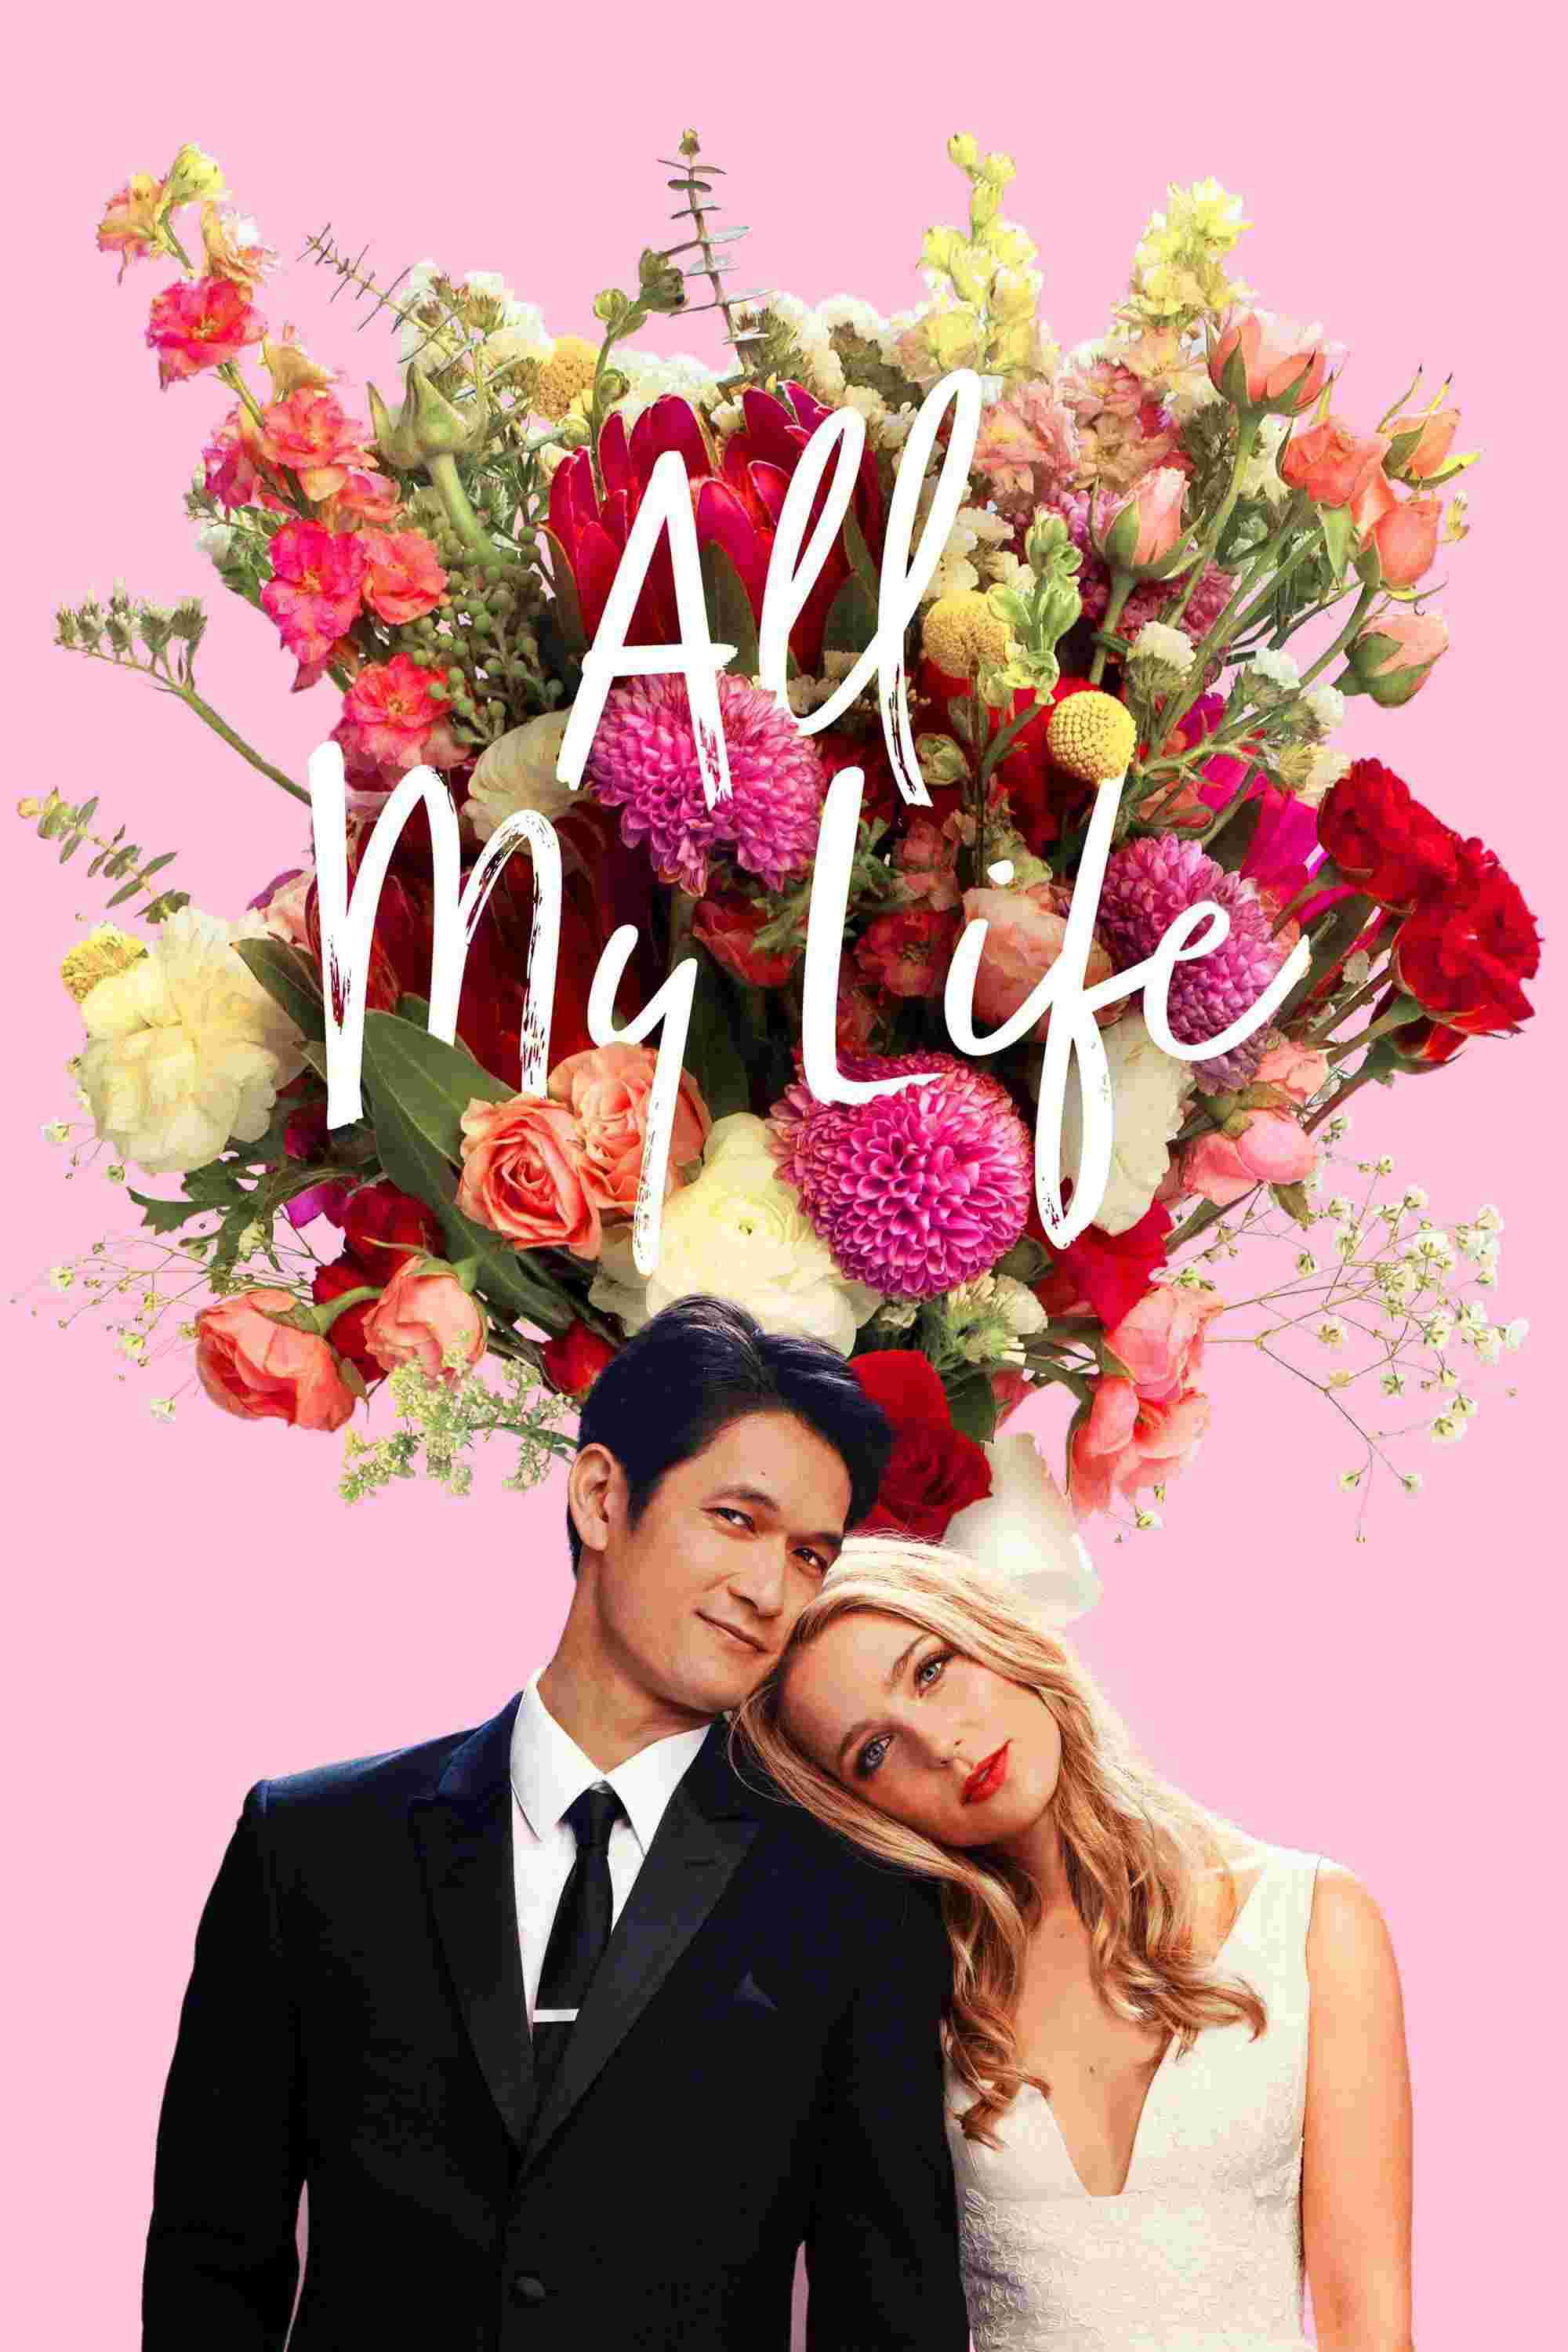 All My Life (2020) Jessica Rothe